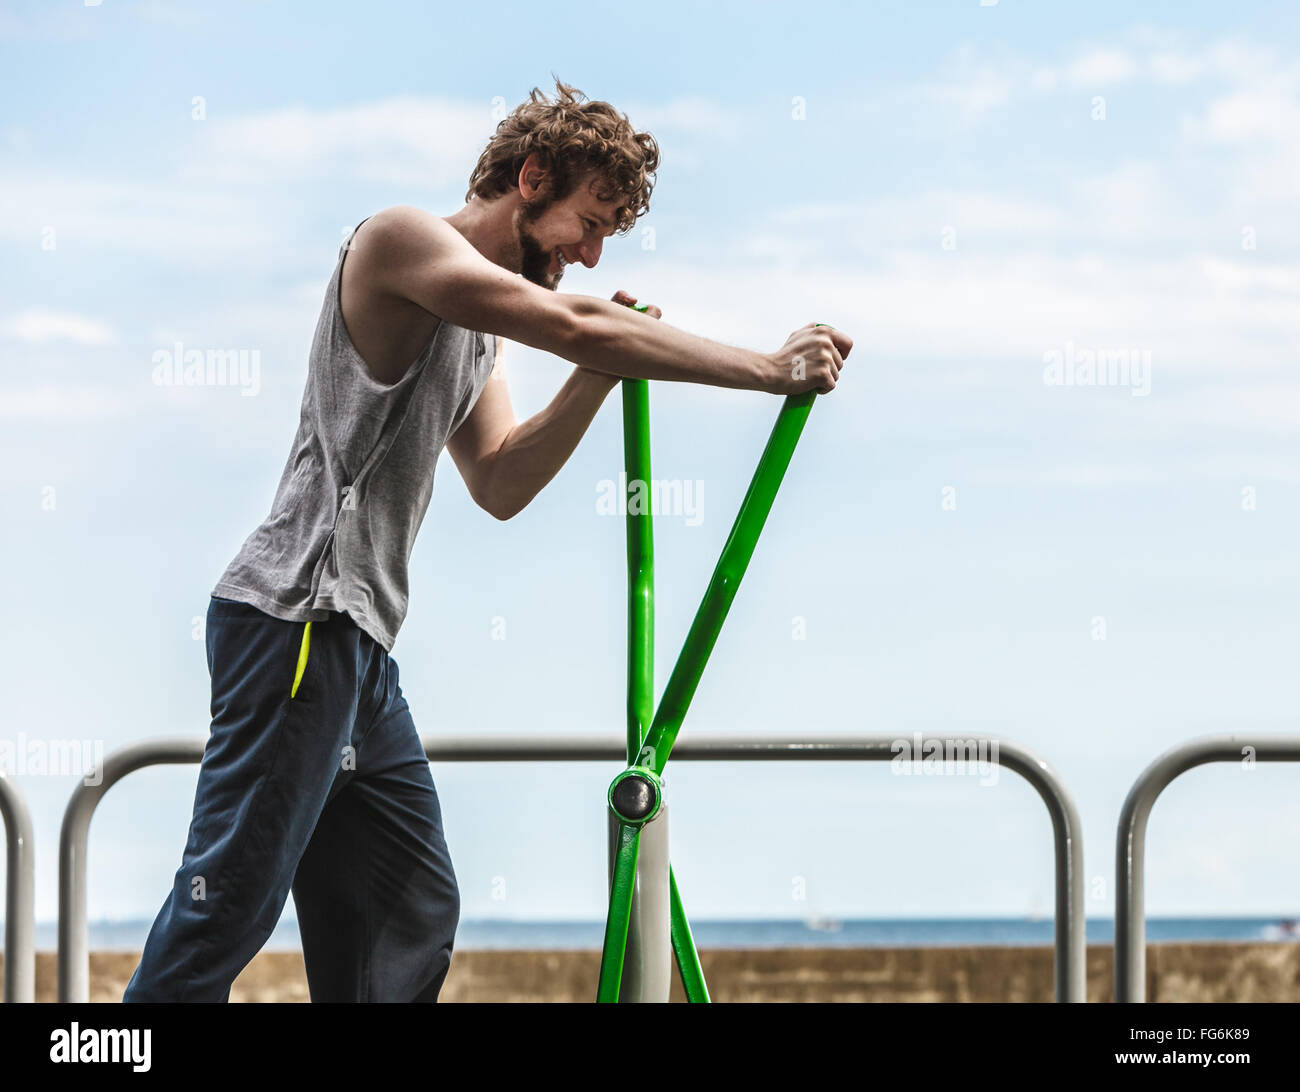 Active young man exercising on elliptical trainer machine. Muscular sporty guy in training suit working out at outdoor gym. Sport fitness and healthy lifestyle concept. Stock Photo